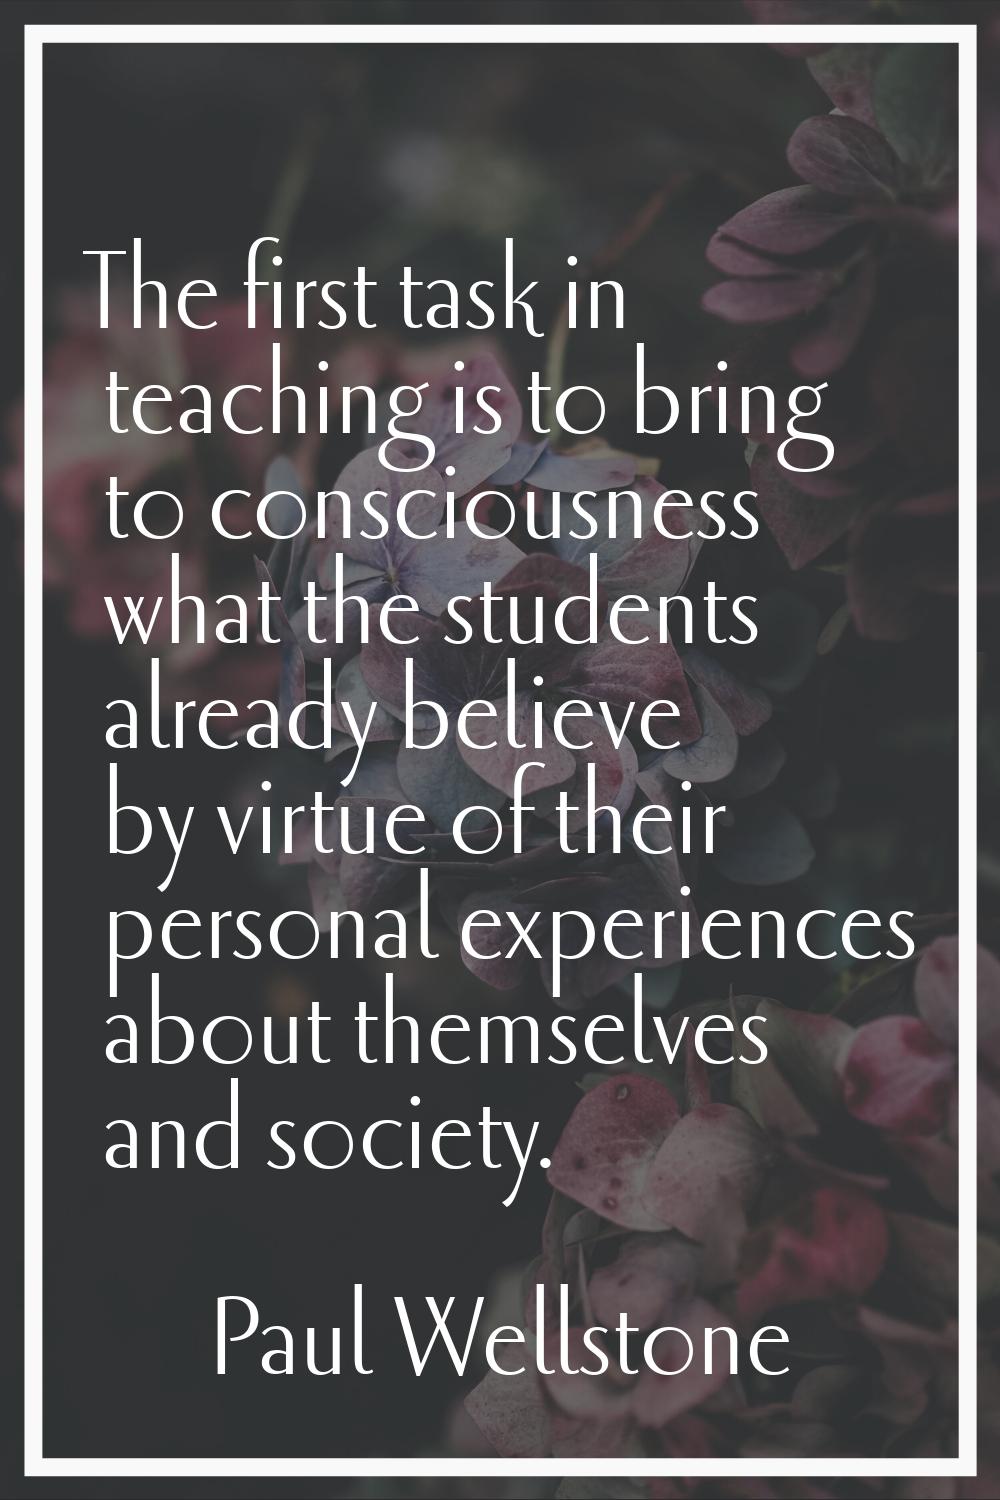 The first task in teaching is to bring to consciousness what the students already believe by virtue